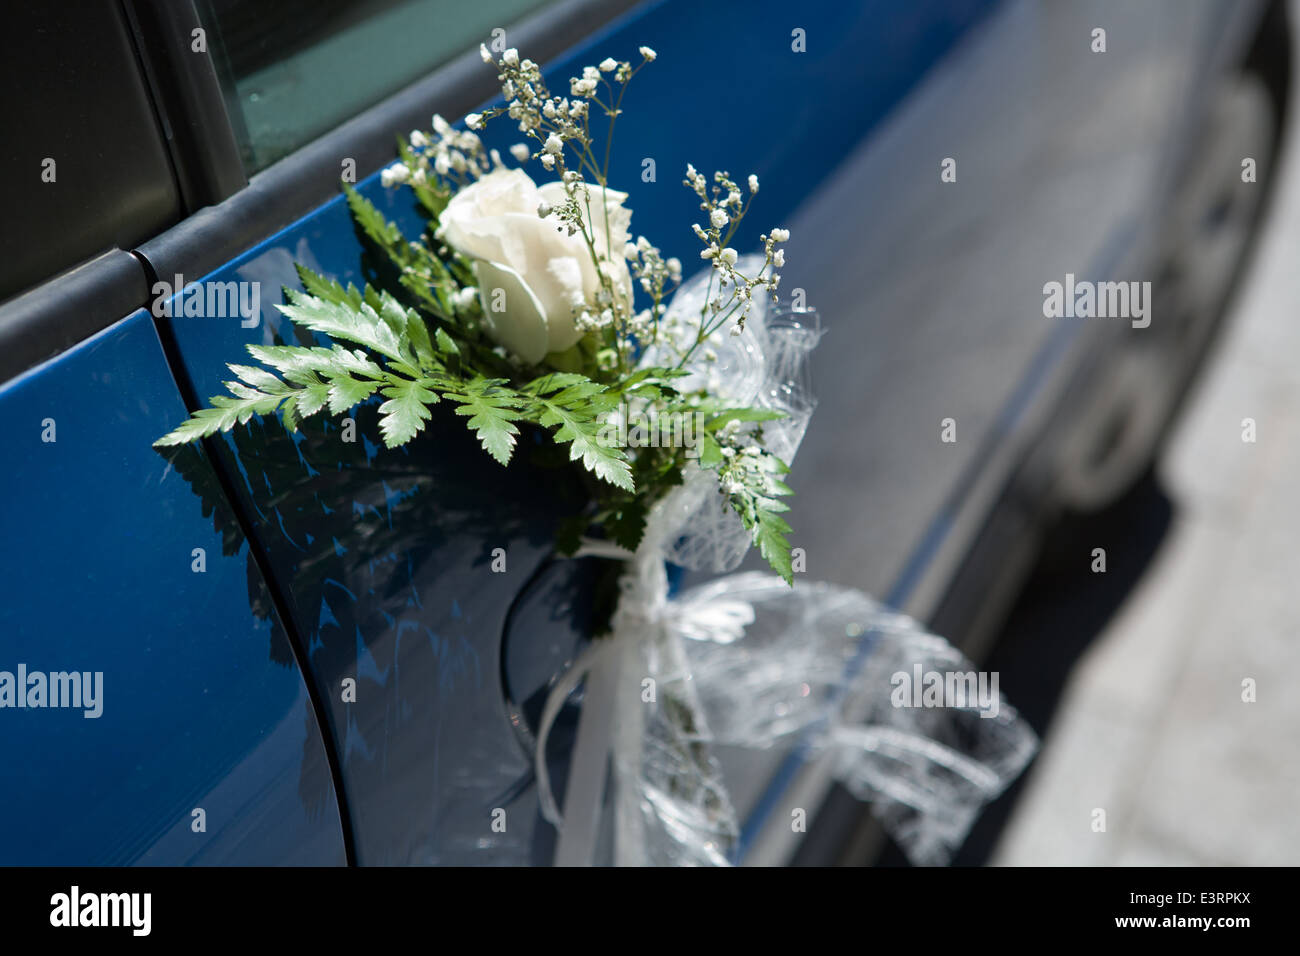 Very special day for most of us. Wedding day. Wedding car Stock Photo